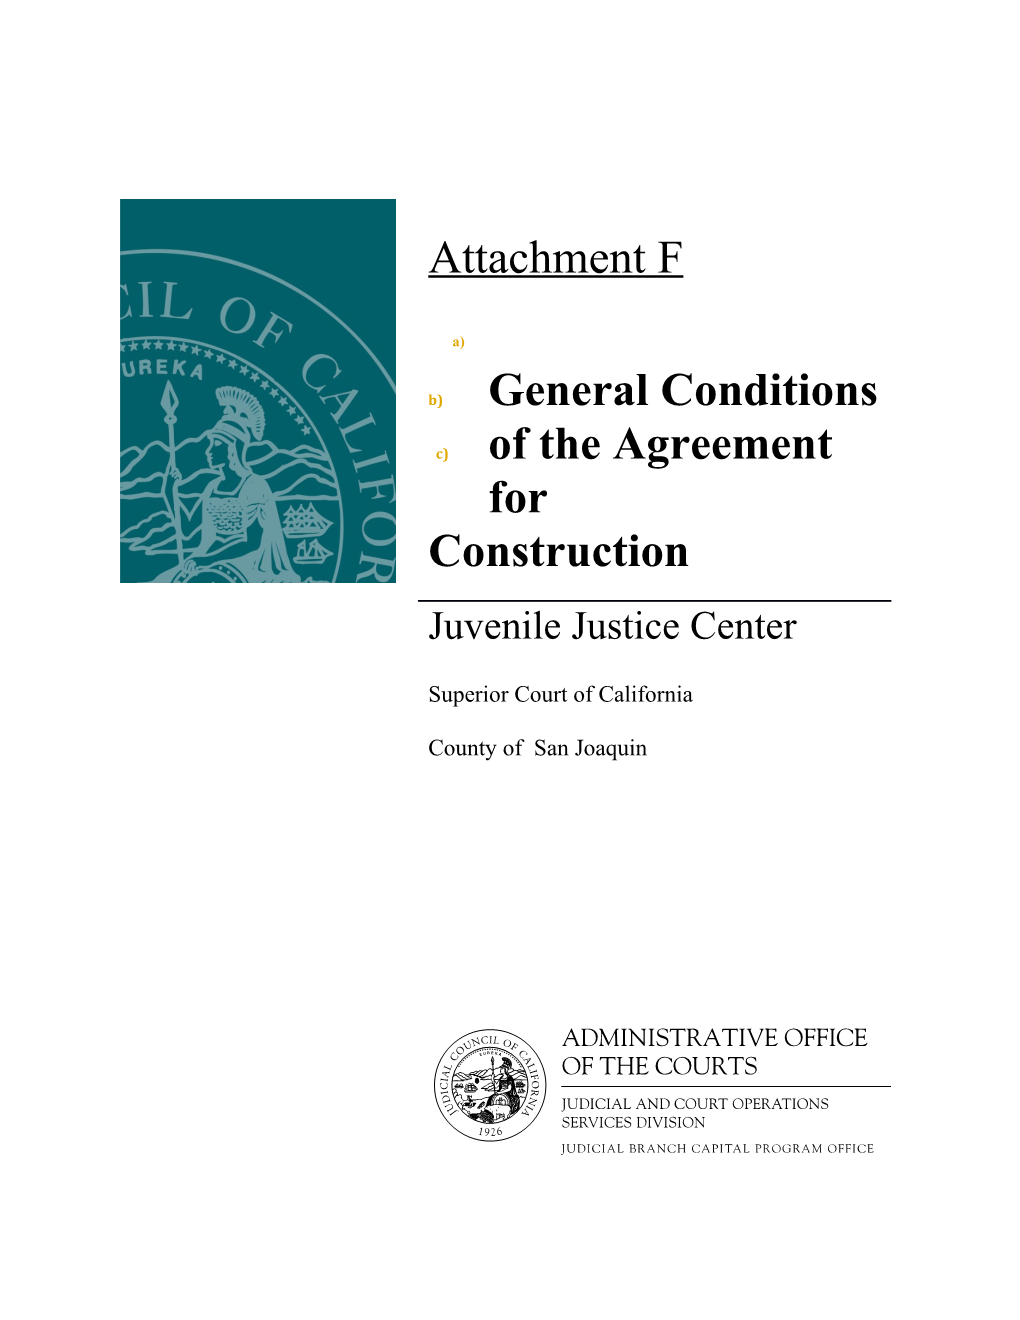 General Conditions of the Agreement